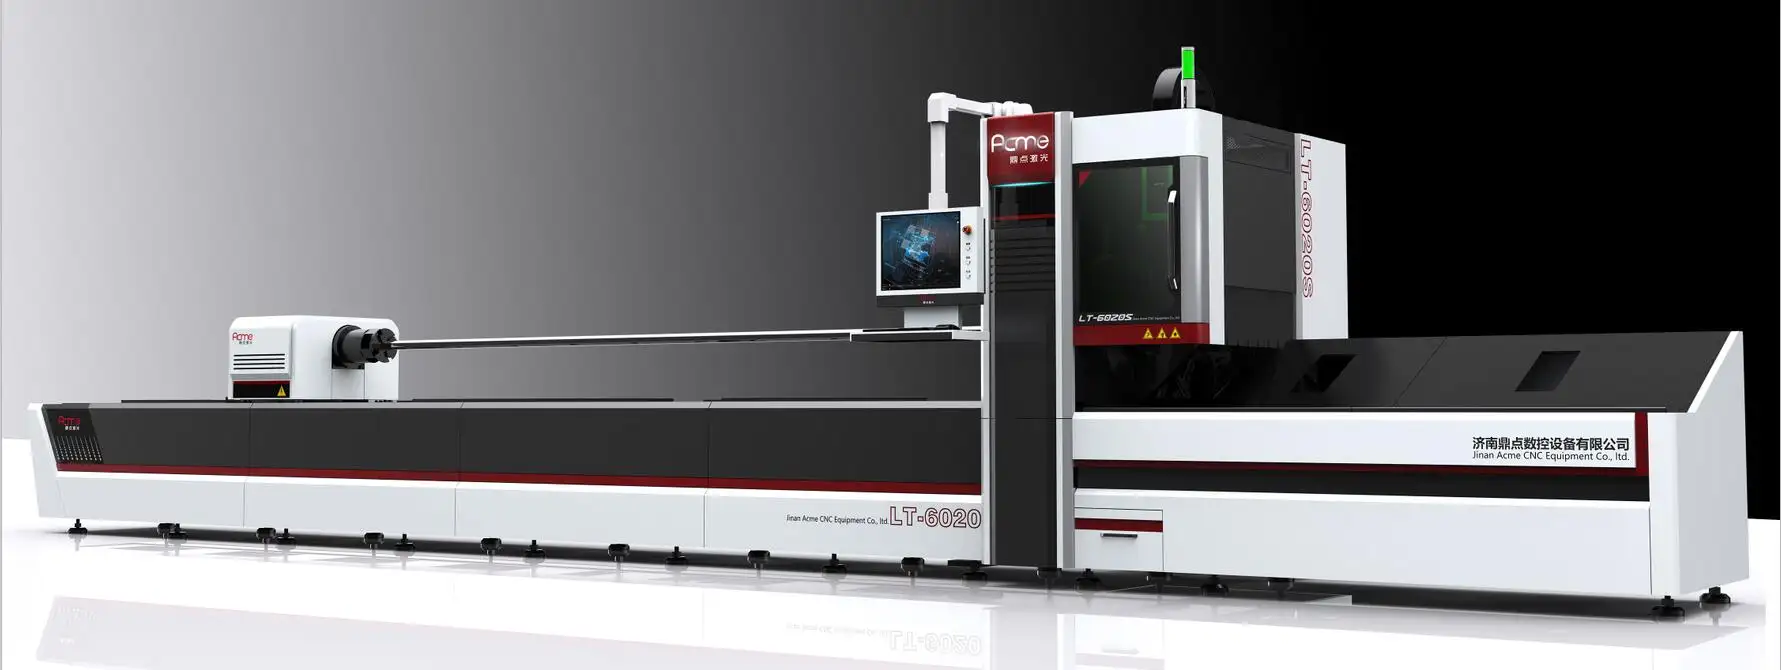 Acme High Efficiency and Popular tube laser cutter LT - 6020e